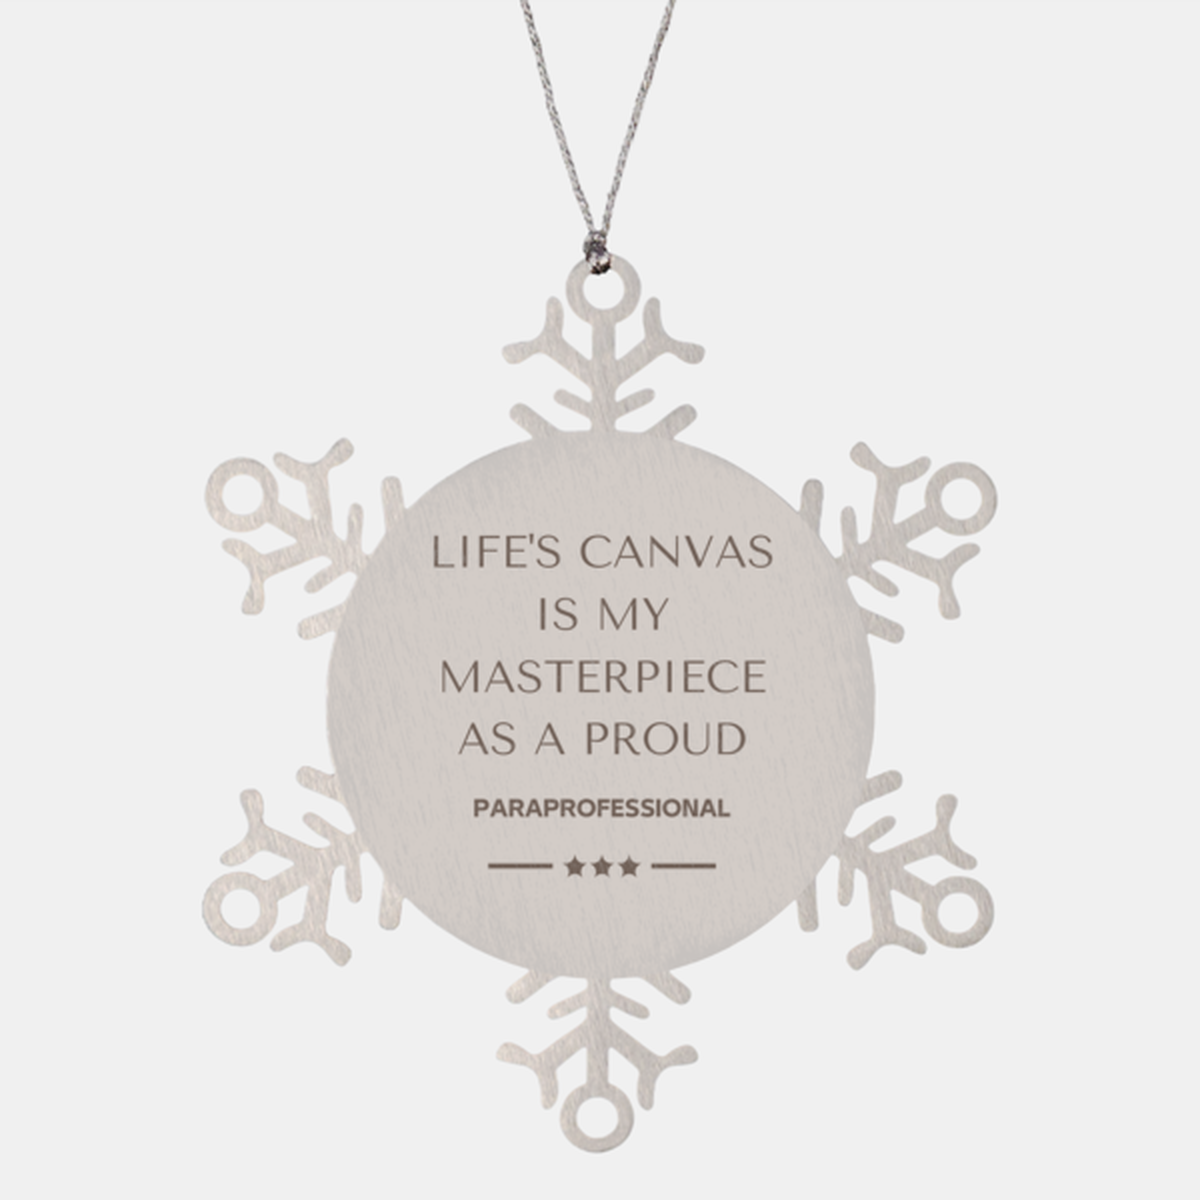 Proud Paraprofessional Gifts, Life's canvas is my masterpiece, Epic Birthday Christmas Unique Snowflake Ornament For Paraprofessional, Coworkers, Men, Women, Friends